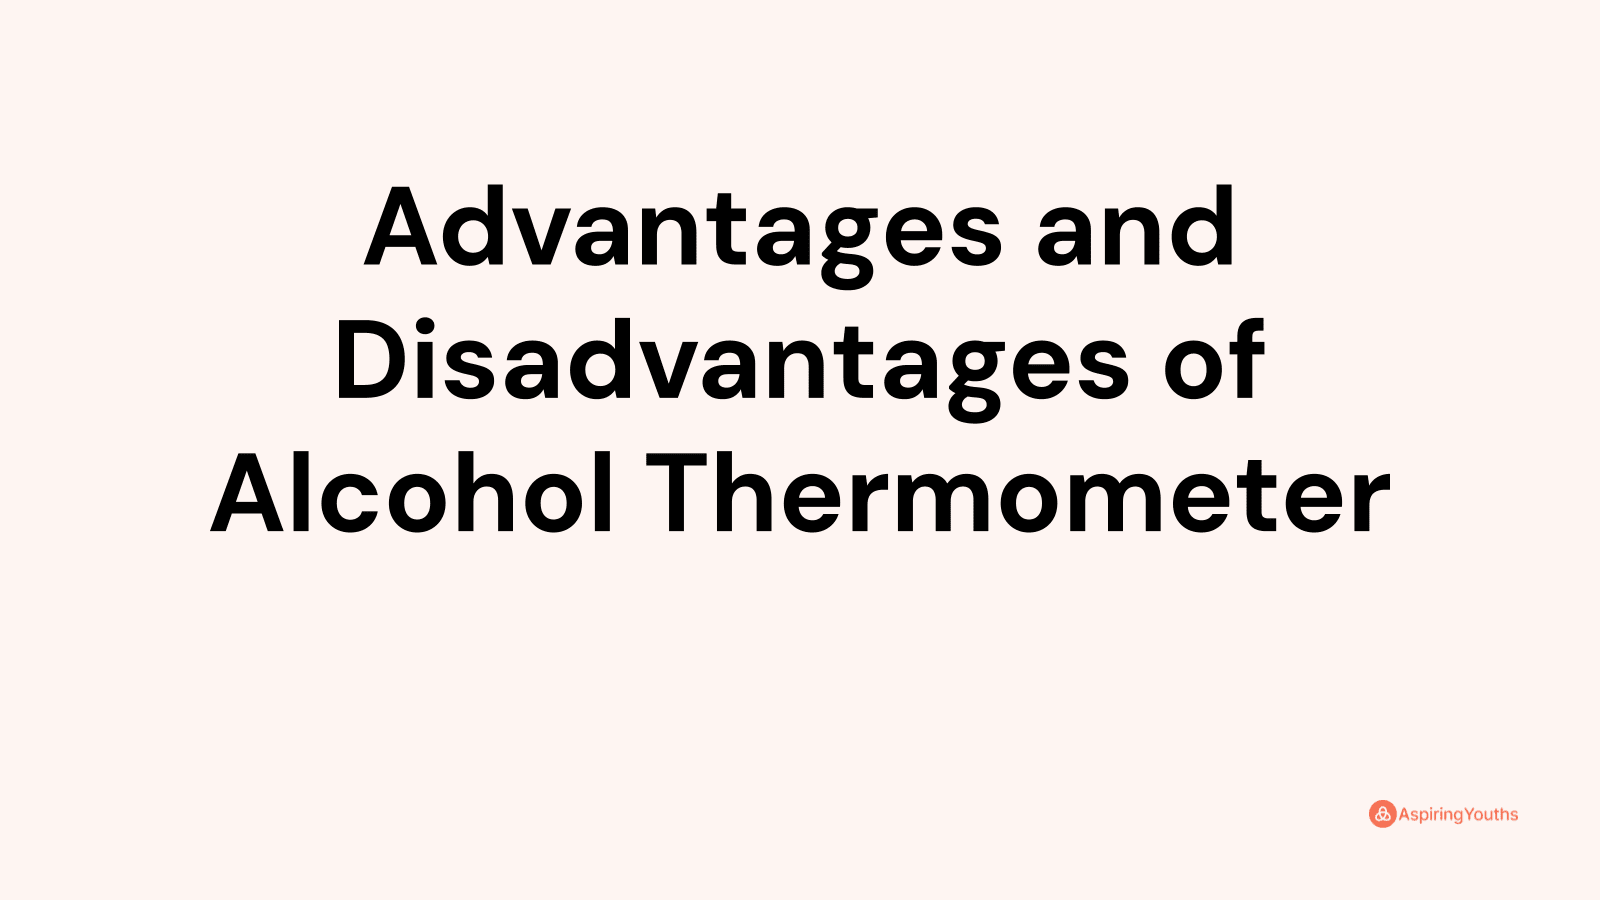 Advantages and disadvantages of Alcohol Thermometer